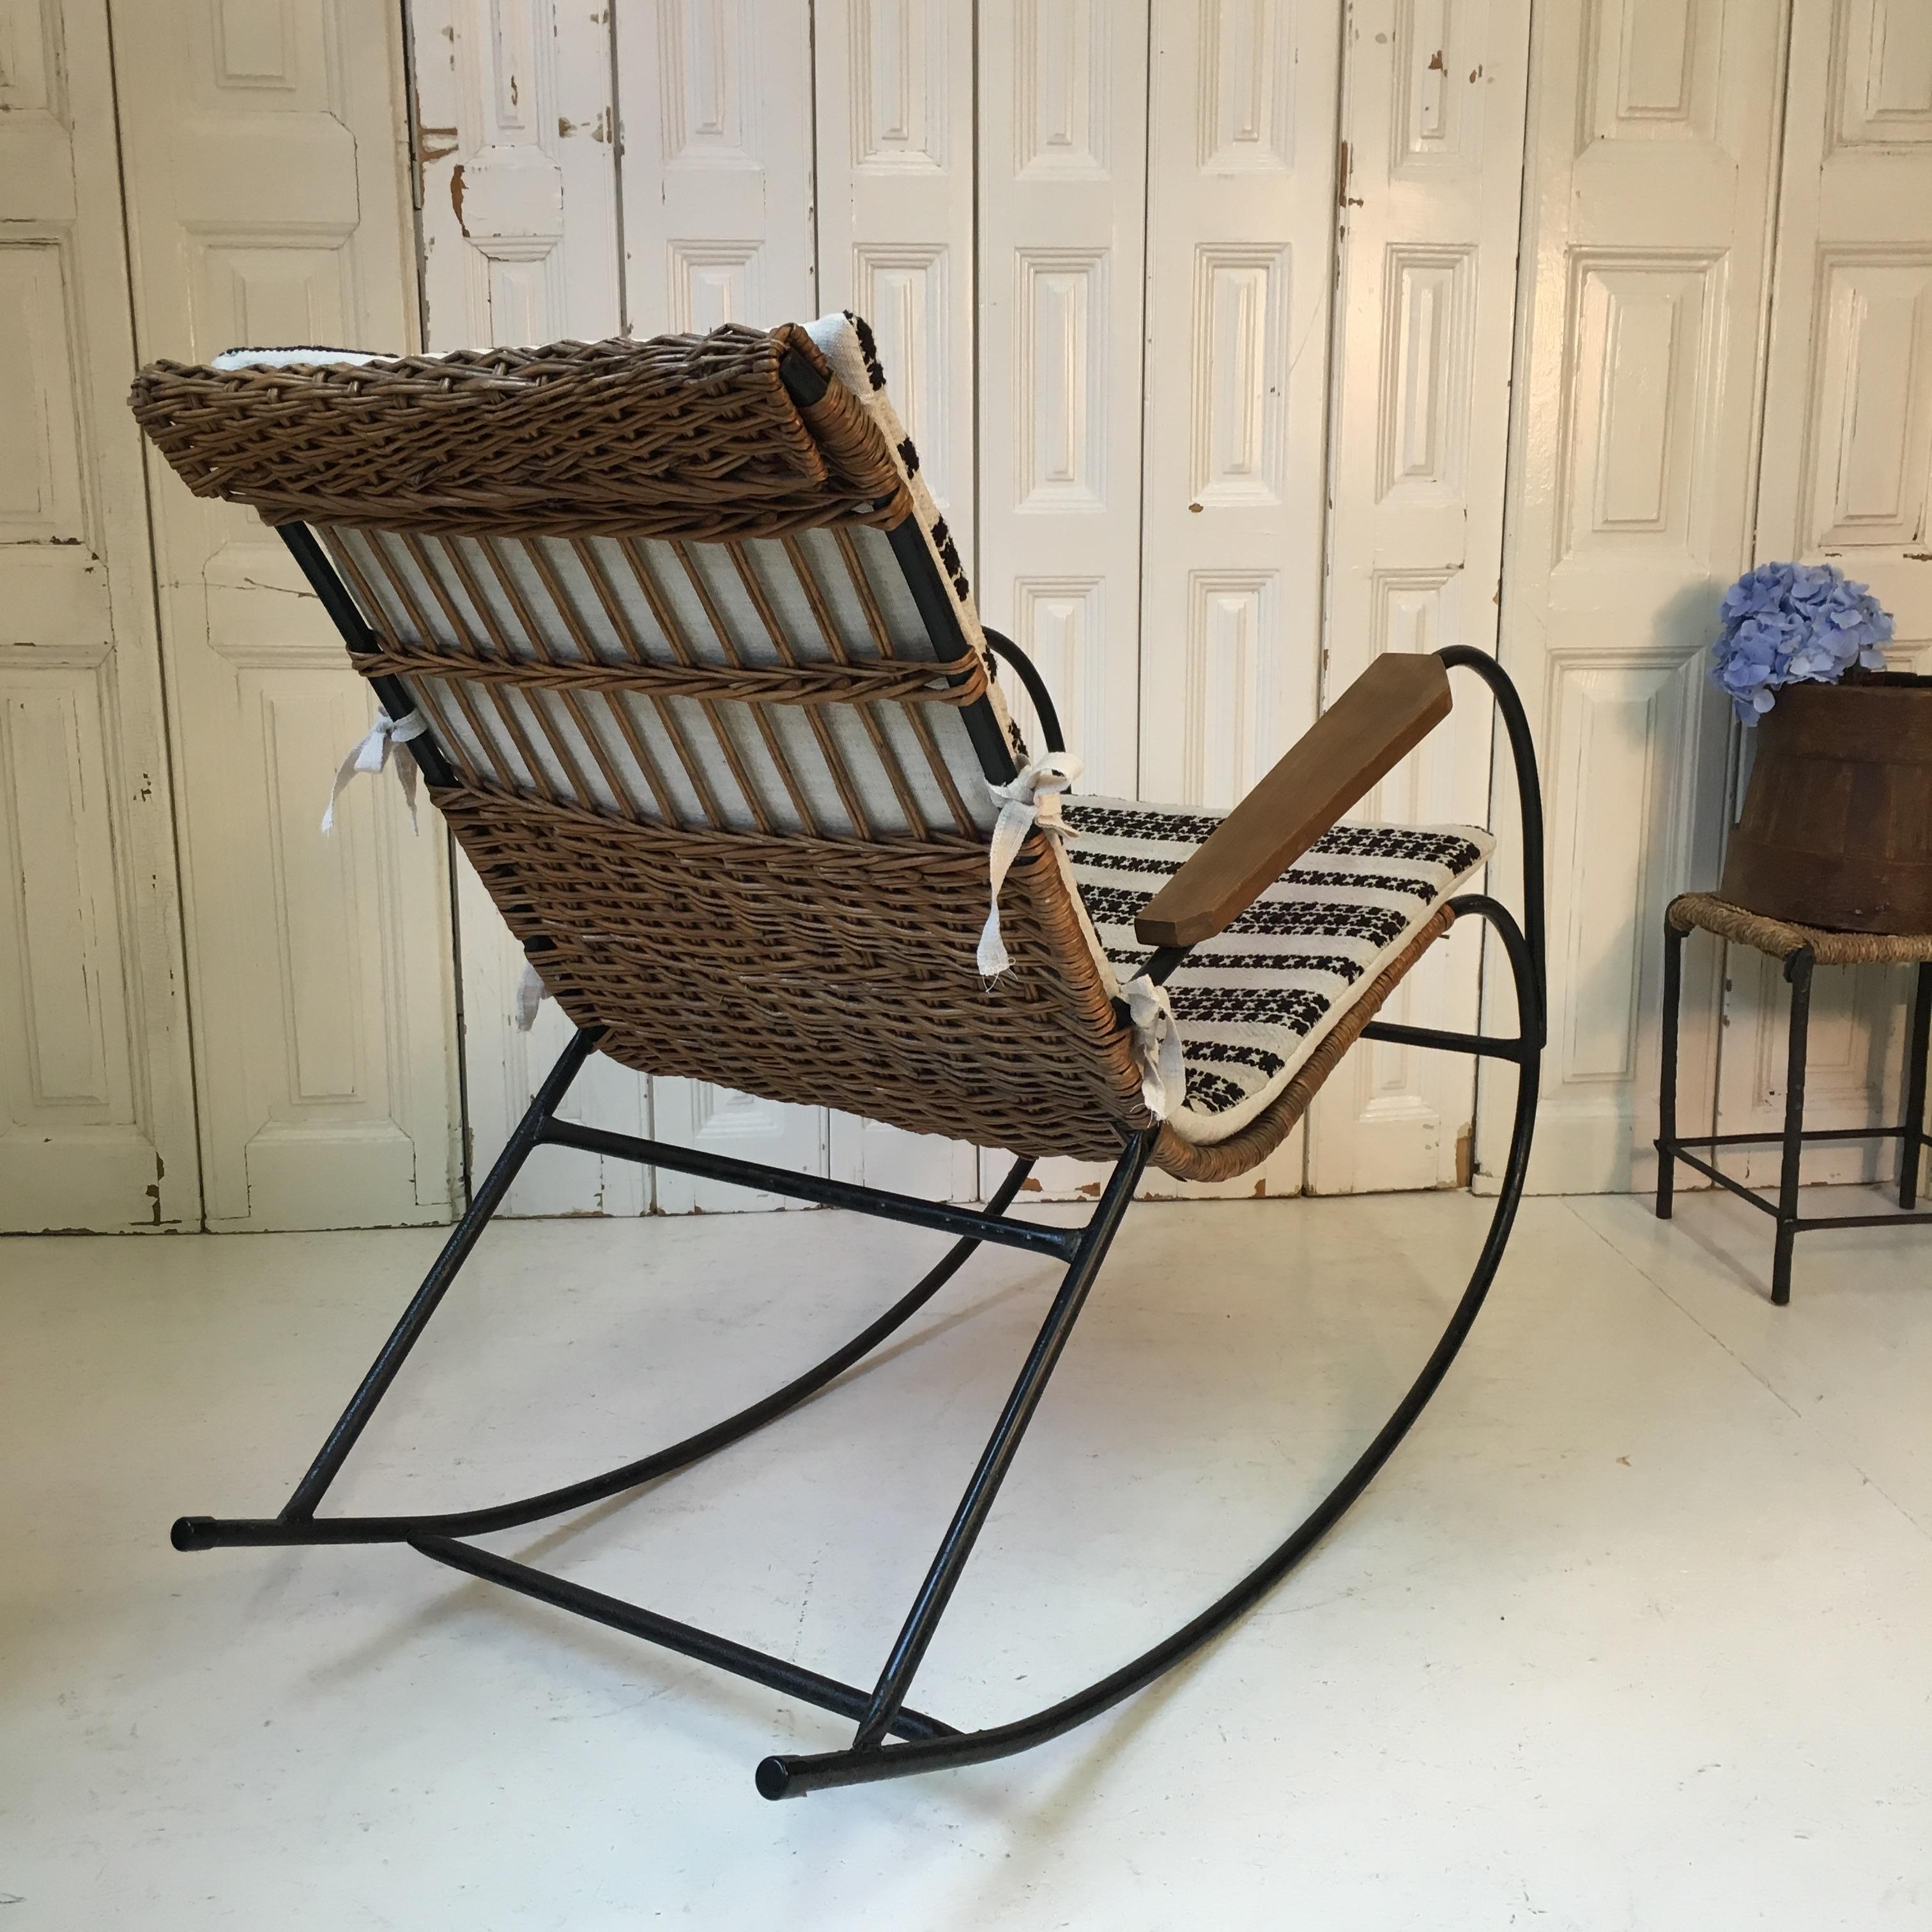 German Industrial Iron & Wicker Rocking Chair with Vintage Linen Cushion, Mid-Century